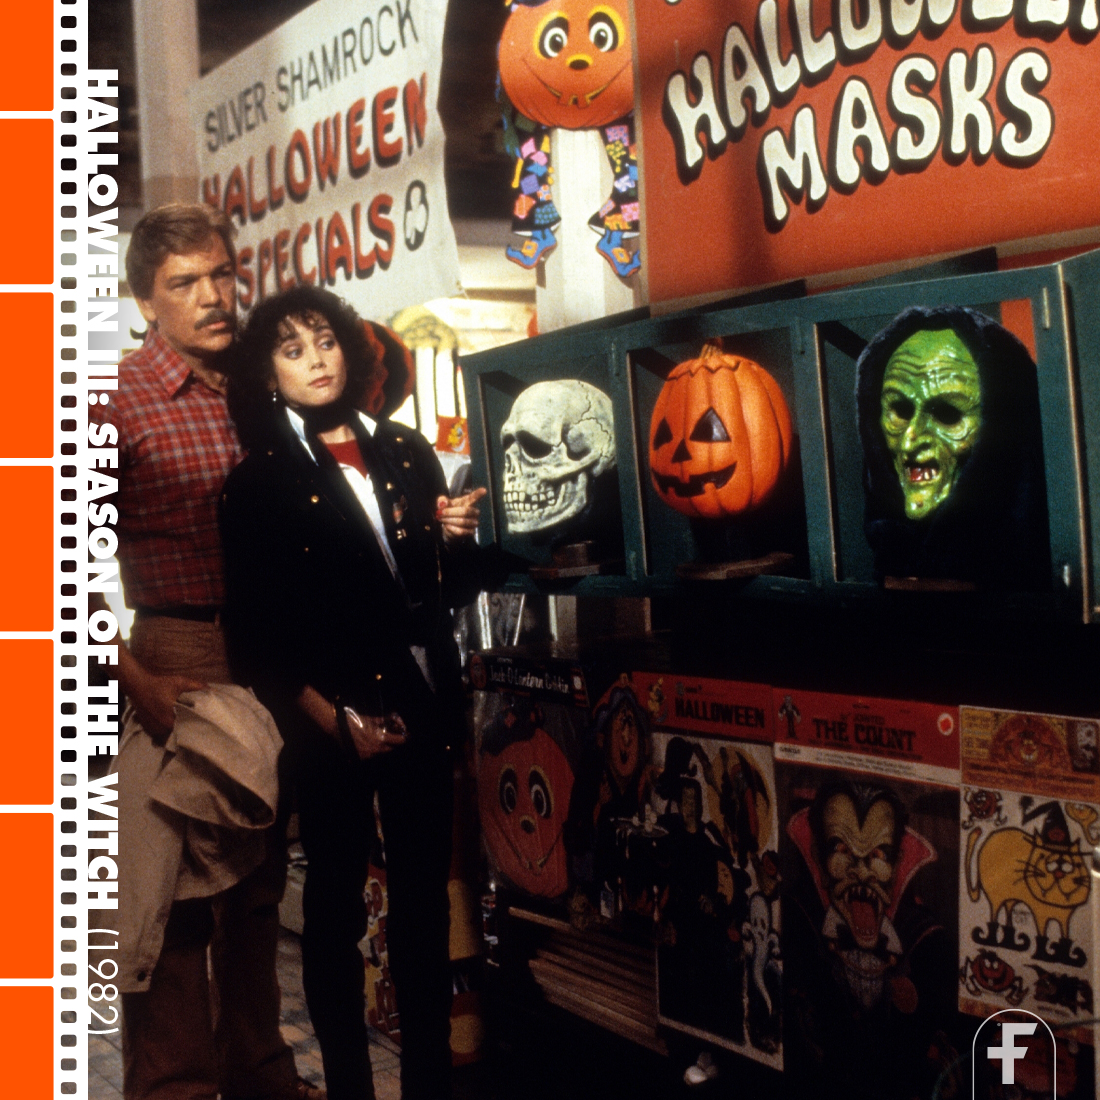 'All you lucky kids with Silver Shamrock masks, gather 'round your TV set, put on your masks and watch. All witches, all skeletons, all Jack-O-Lanterns, gather 'round and watch. Watch the magic pumpkin. Watch...' This day in 1982: HALLOWEEN III: SEASON OF THE WITCH was released.